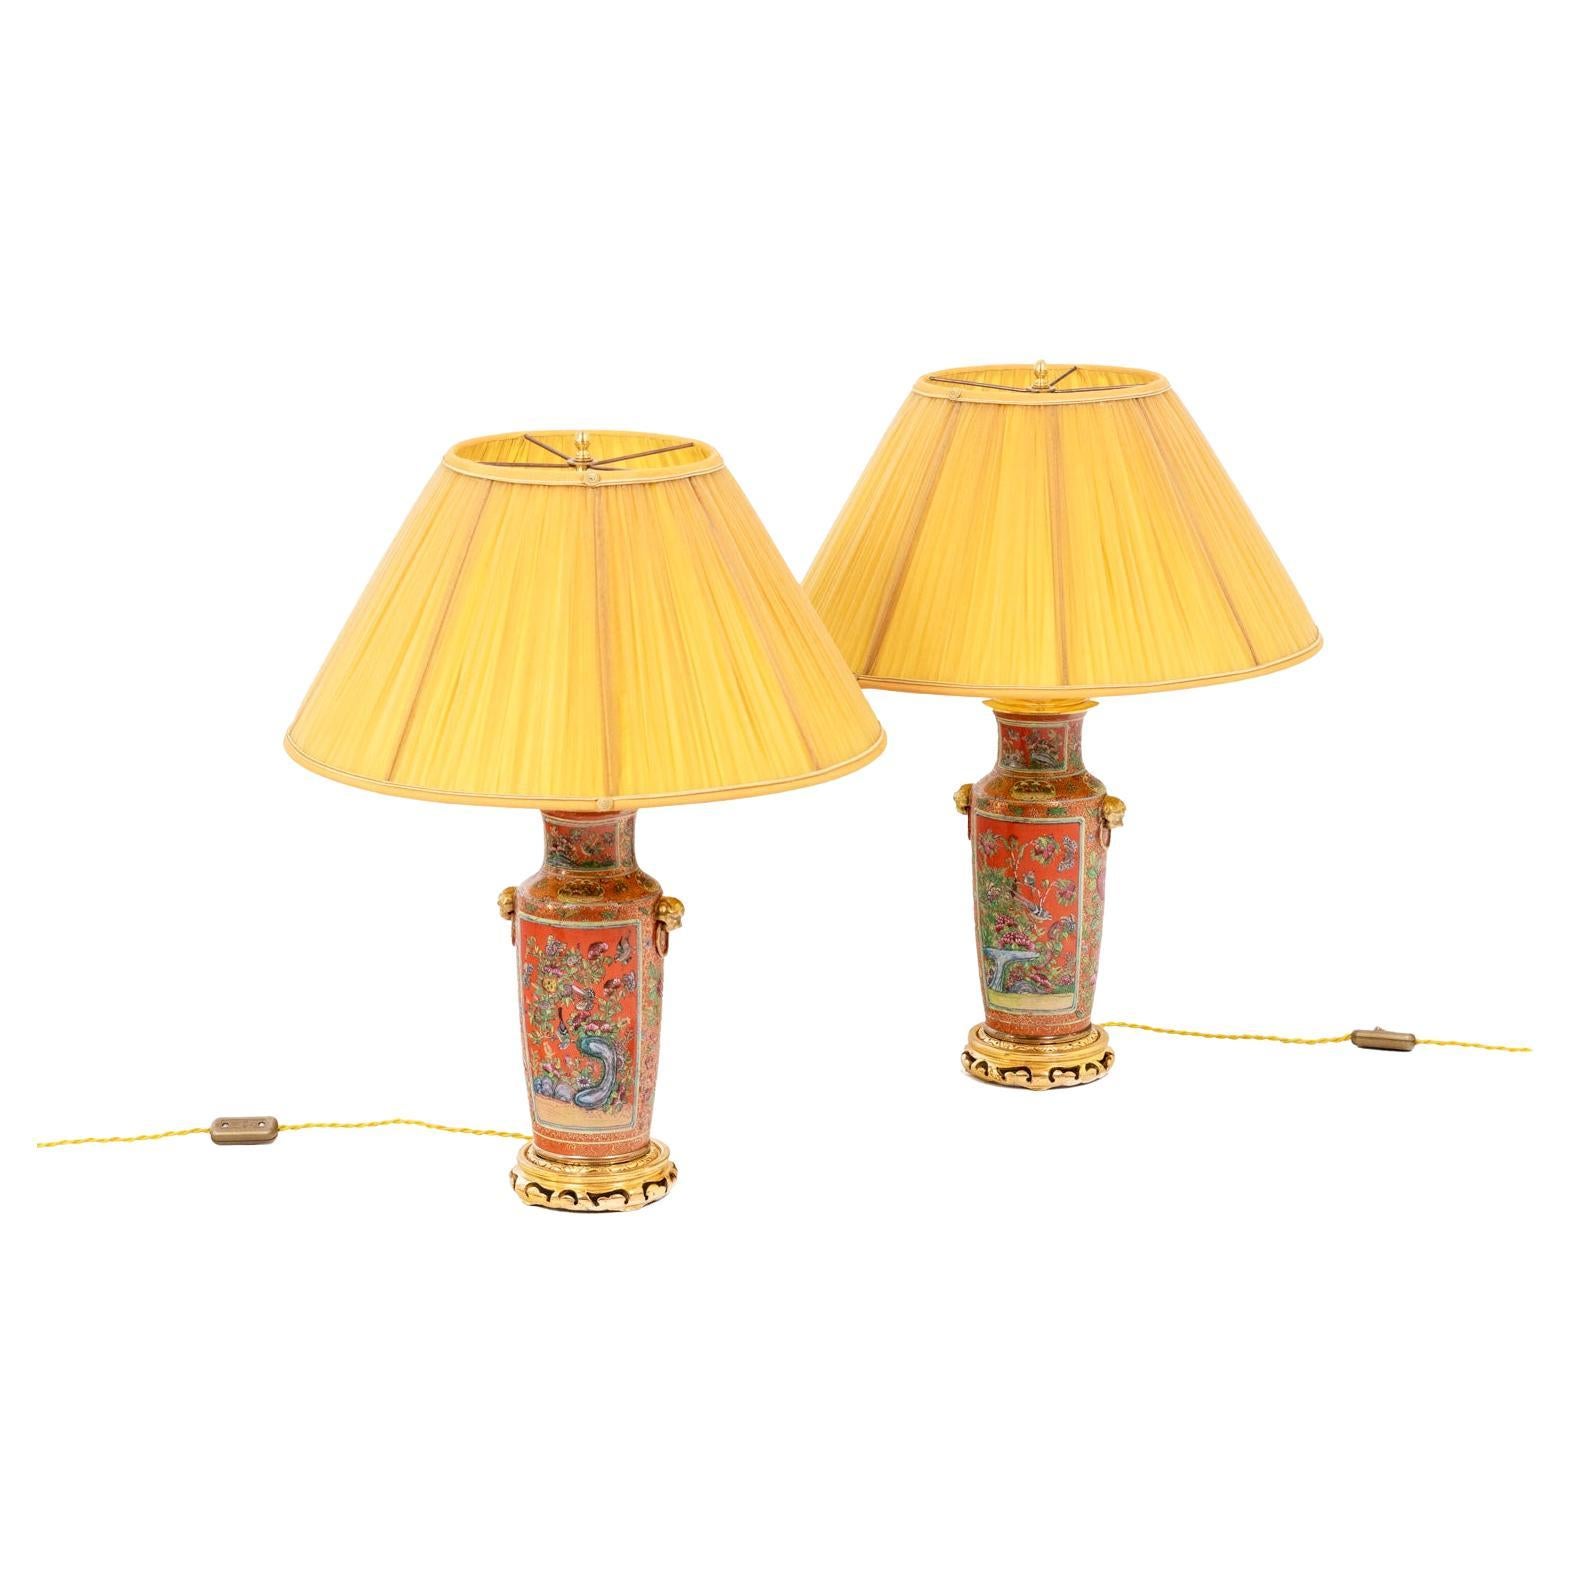 Pair of Canton Porcelain and Bronze Lamps, circa 1880